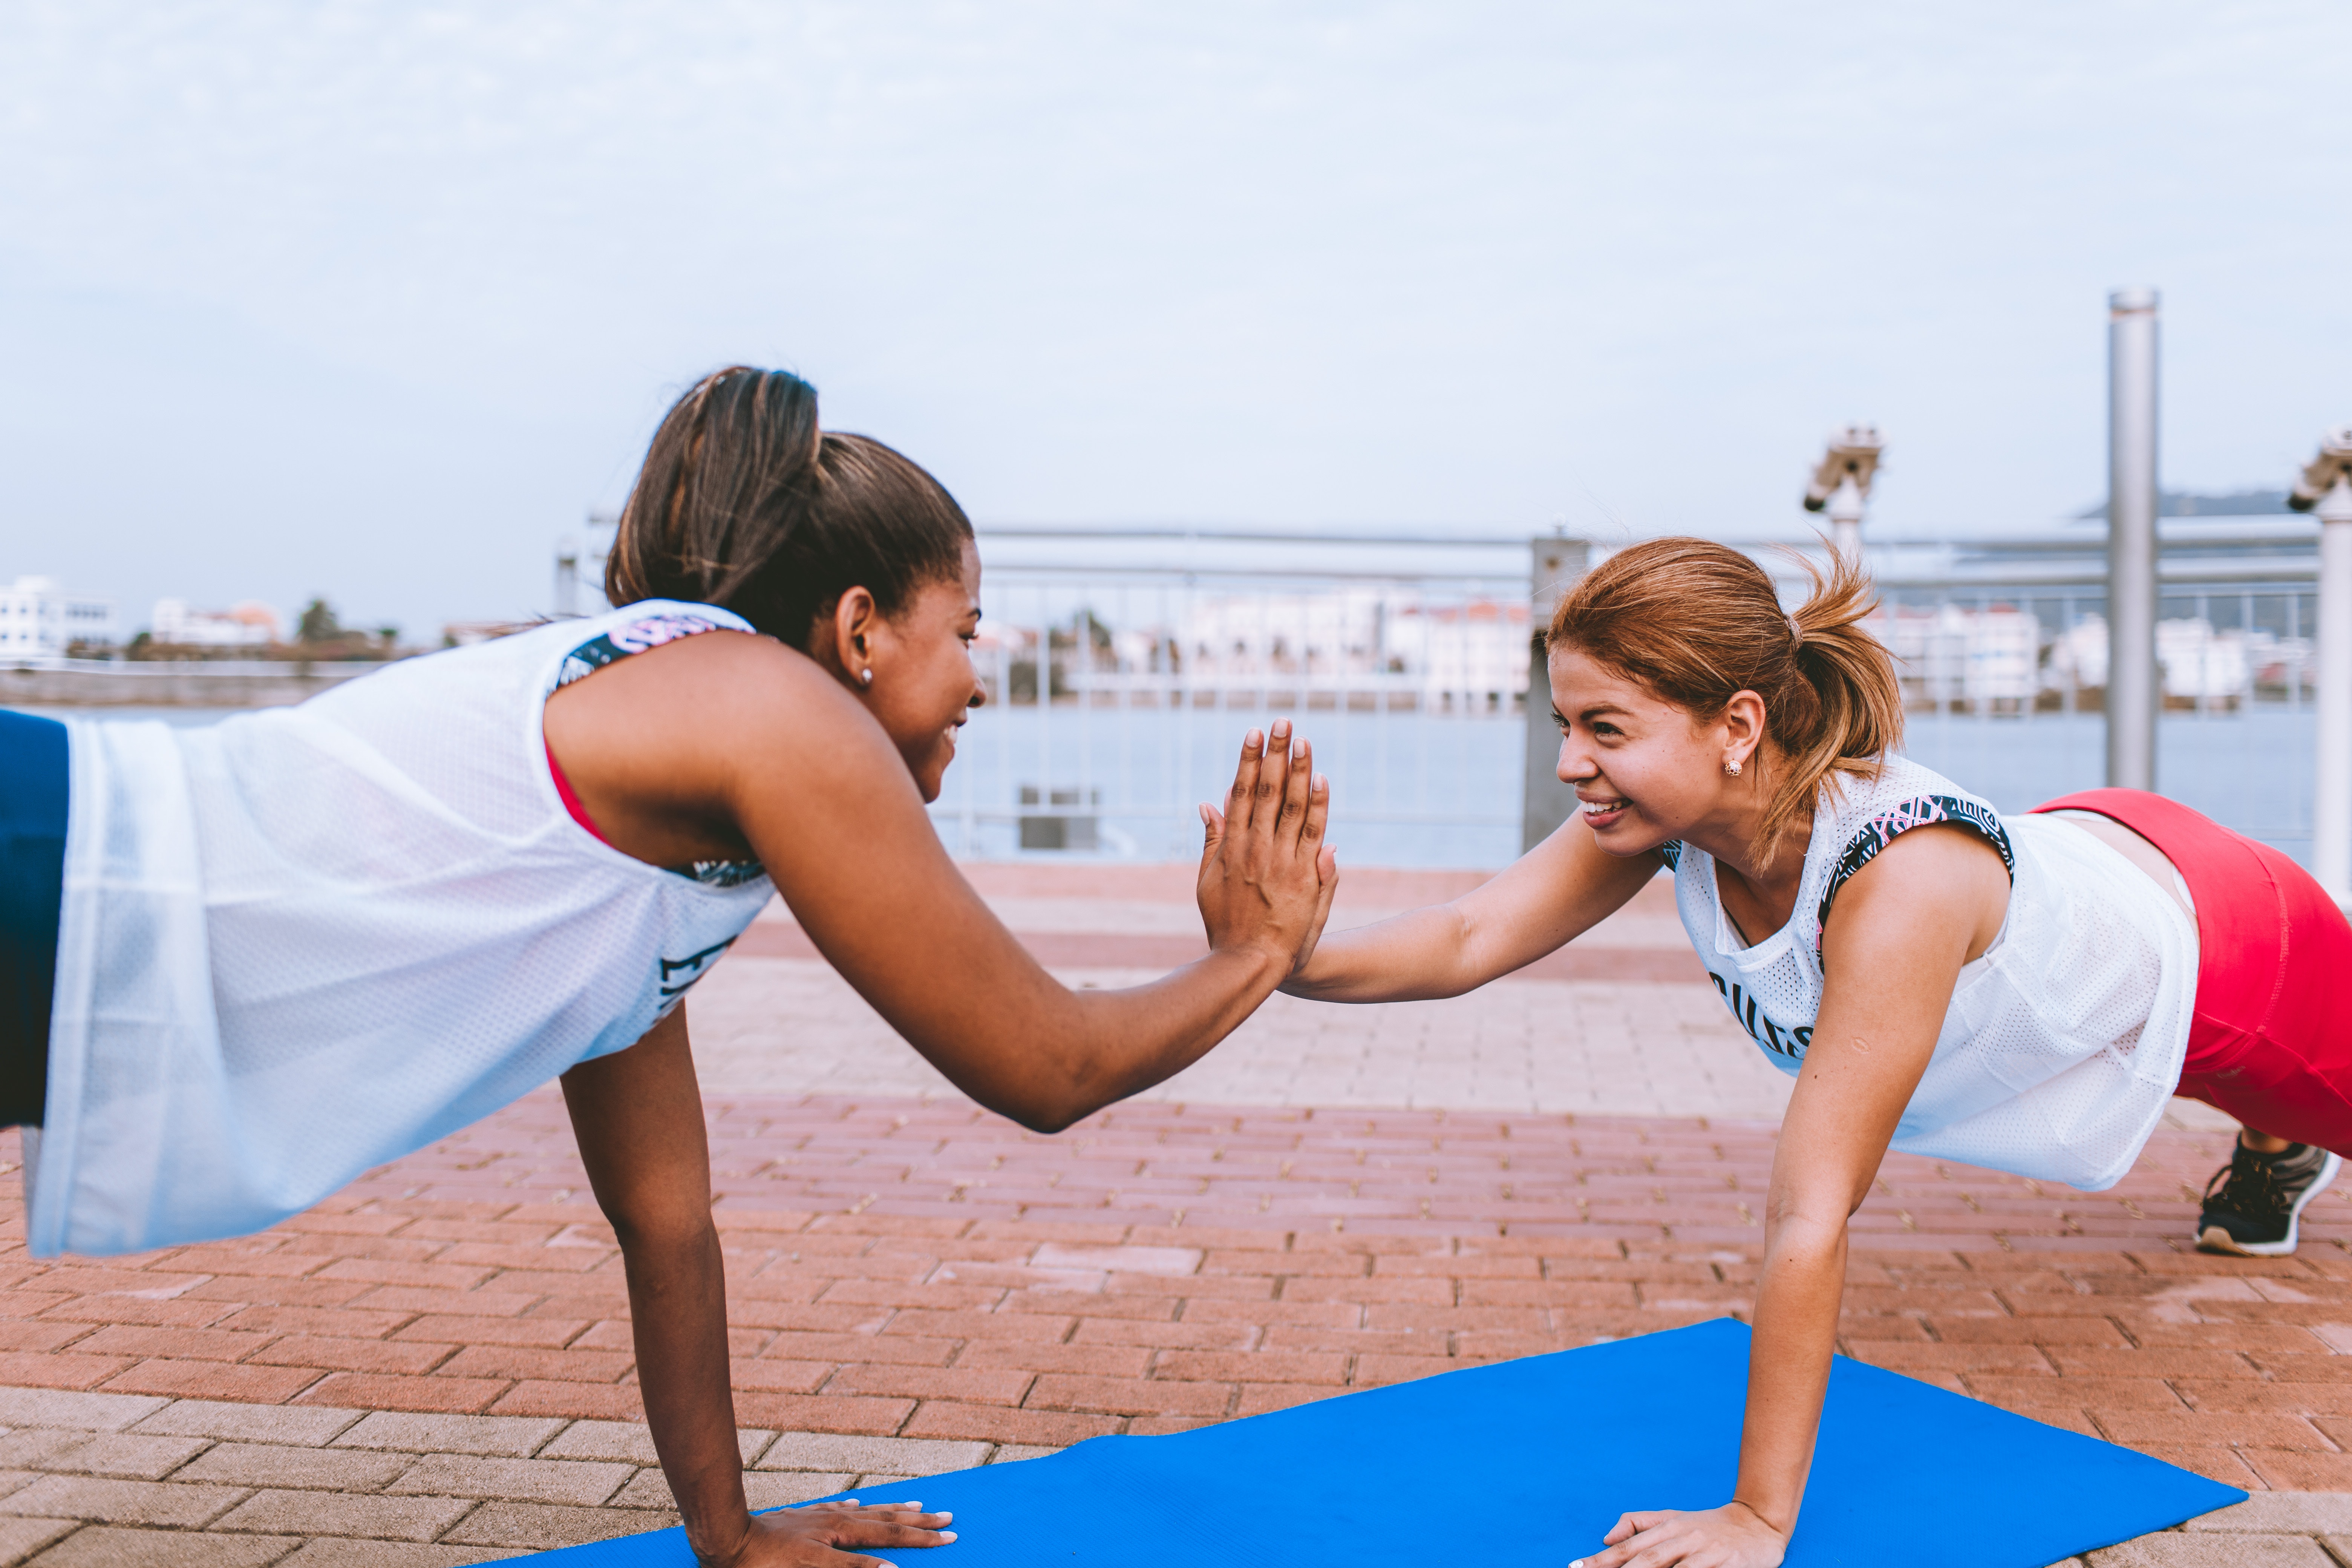 Two women are facing each other and smiling. They are performing a plank and high fiving on a pier.